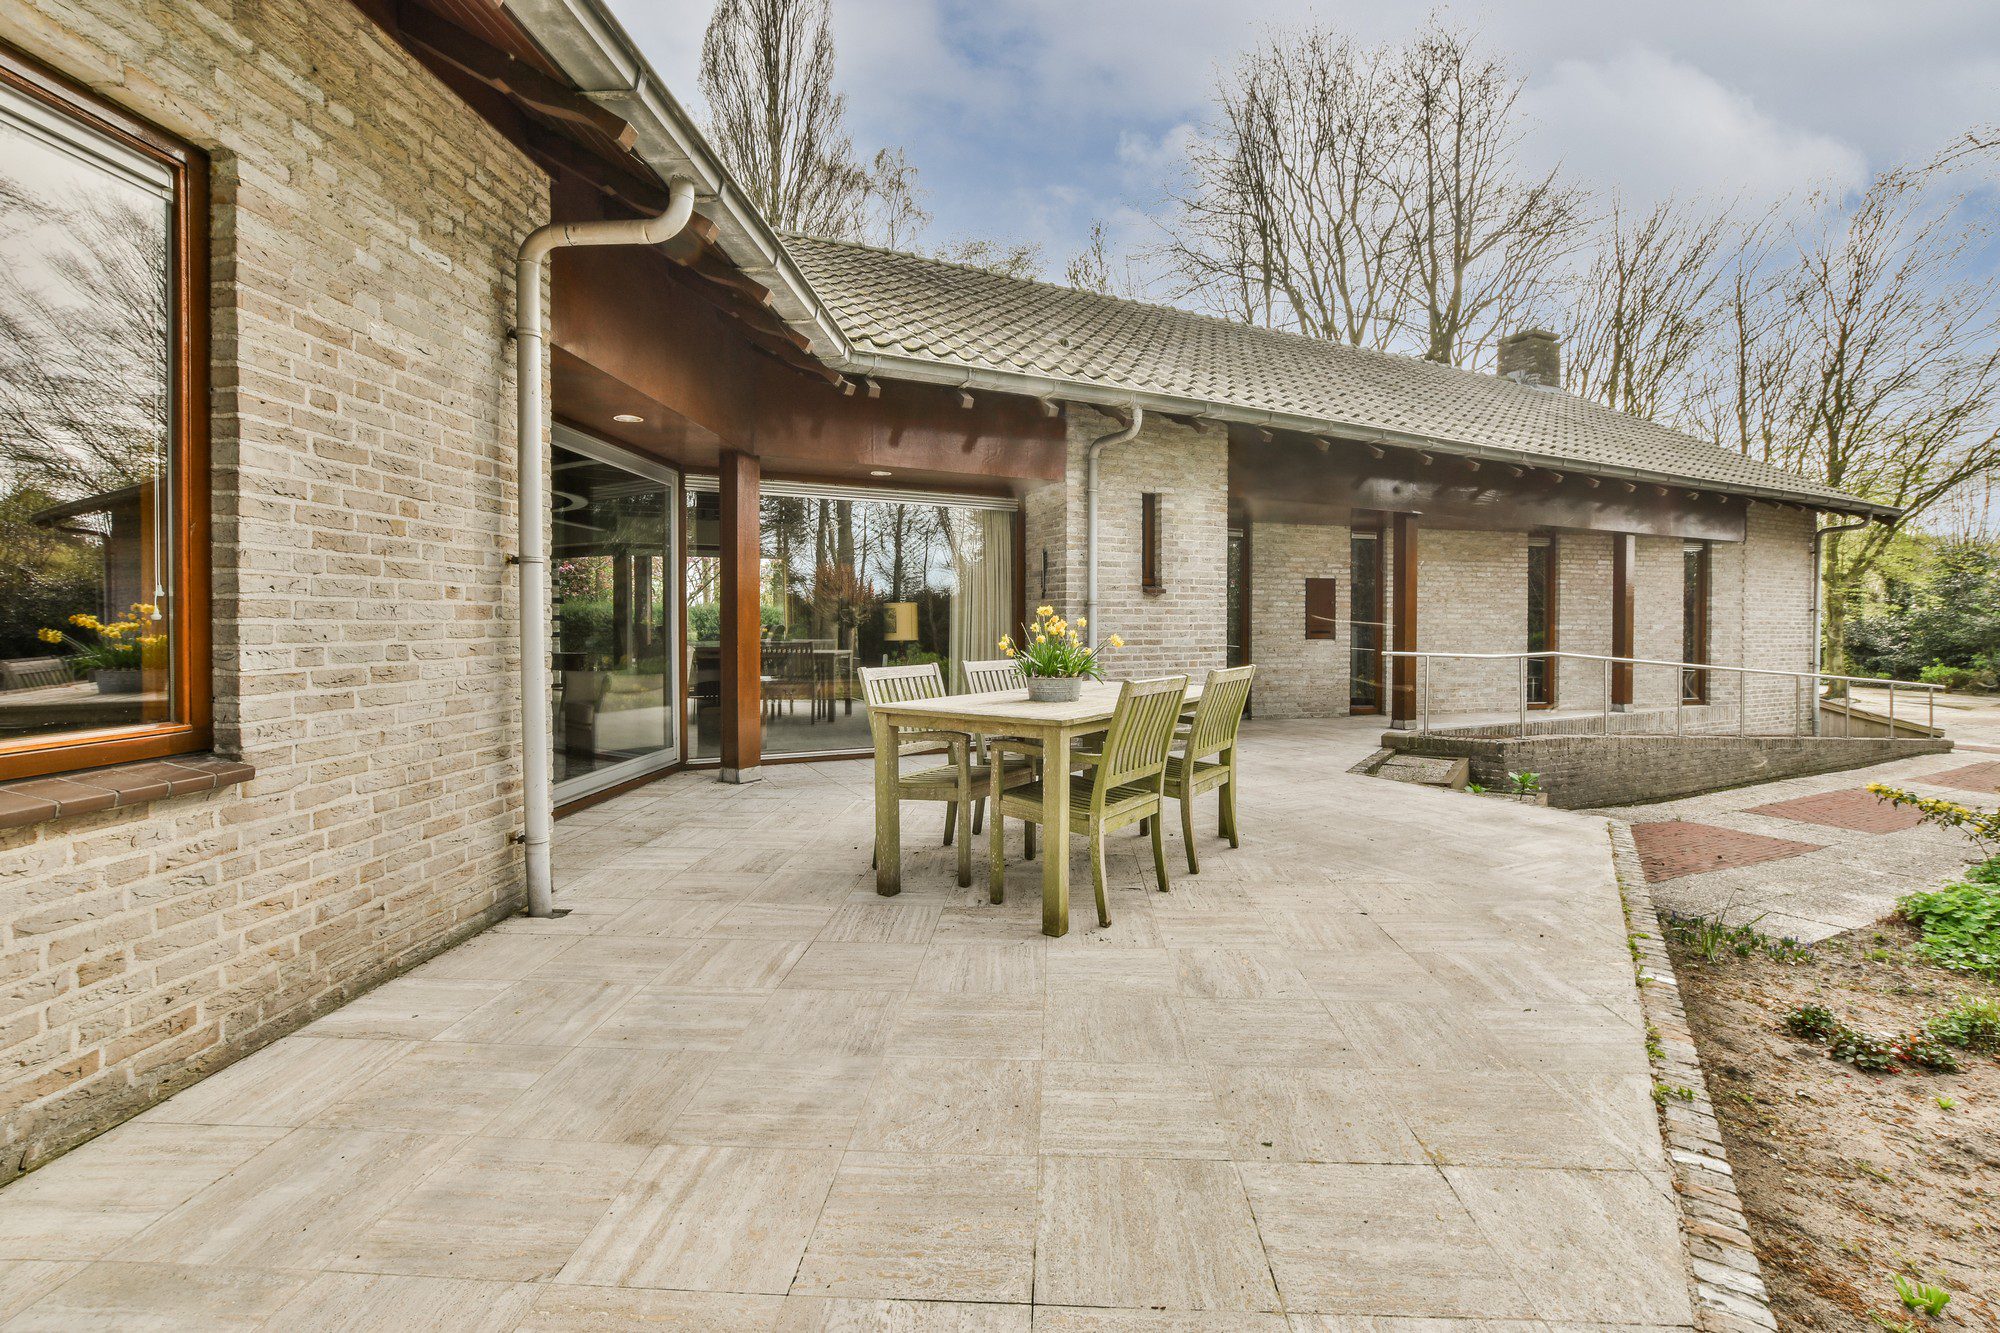 This is an image showing the exterior of a house with a tiled patio area. The house has light brick walls and a tiled roof. A dining set consisting of a wooden table and chairs is situated on the patio, indicating a space for outdoor dining or relaxation. Large glass windows or doors line the wall of the home facing the patio, offering a view inside the house and likely allowing natural light to enter. Around the patio, there's some landscaping visible, and trees can be seen in the background, suggesting the house is in a residential area with some greenery. Overall, the setting appears tranquil and comfortable for outdoor living.